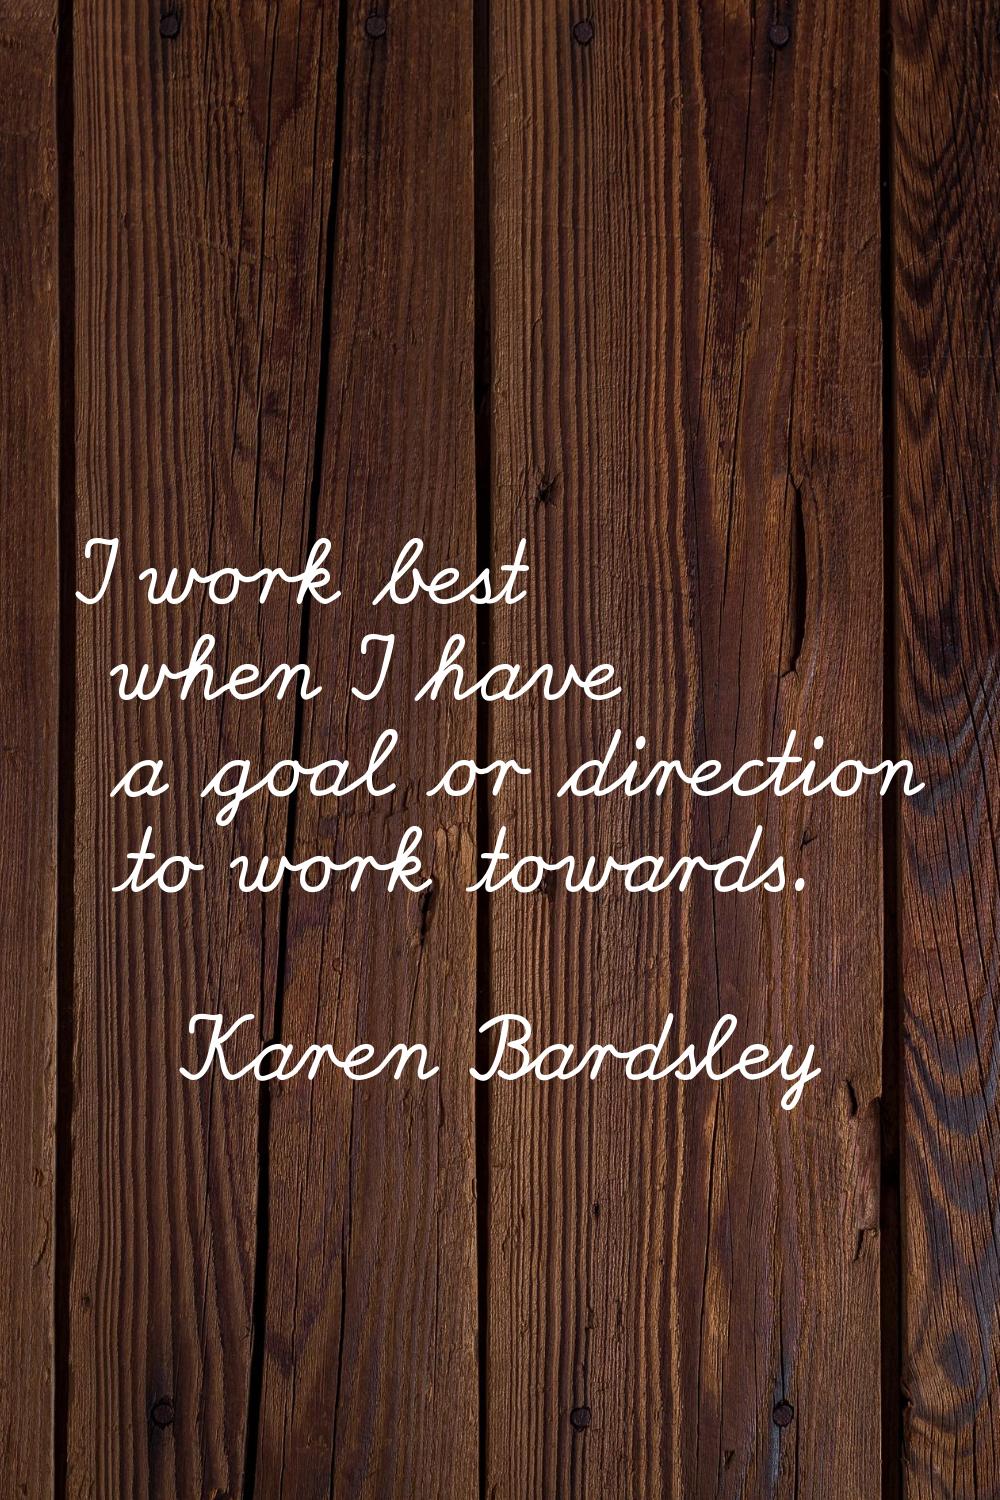 I work best when I have a goal or direction to work towards.